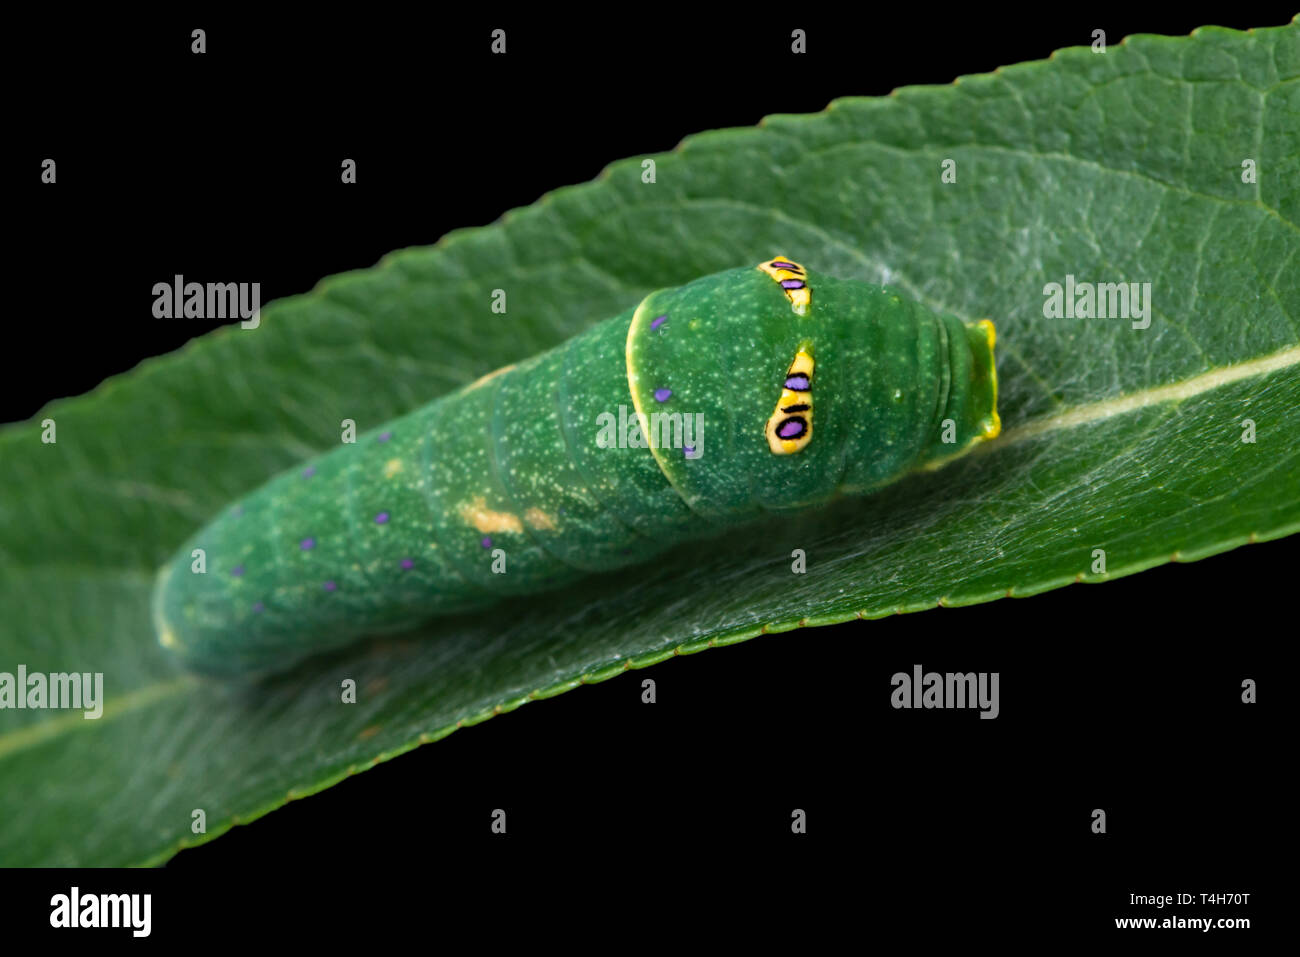 Tiger swallowtail (Papilio rutulus) caterpillar on a willow leaf, with false eye spots - on a black background Stock Photo